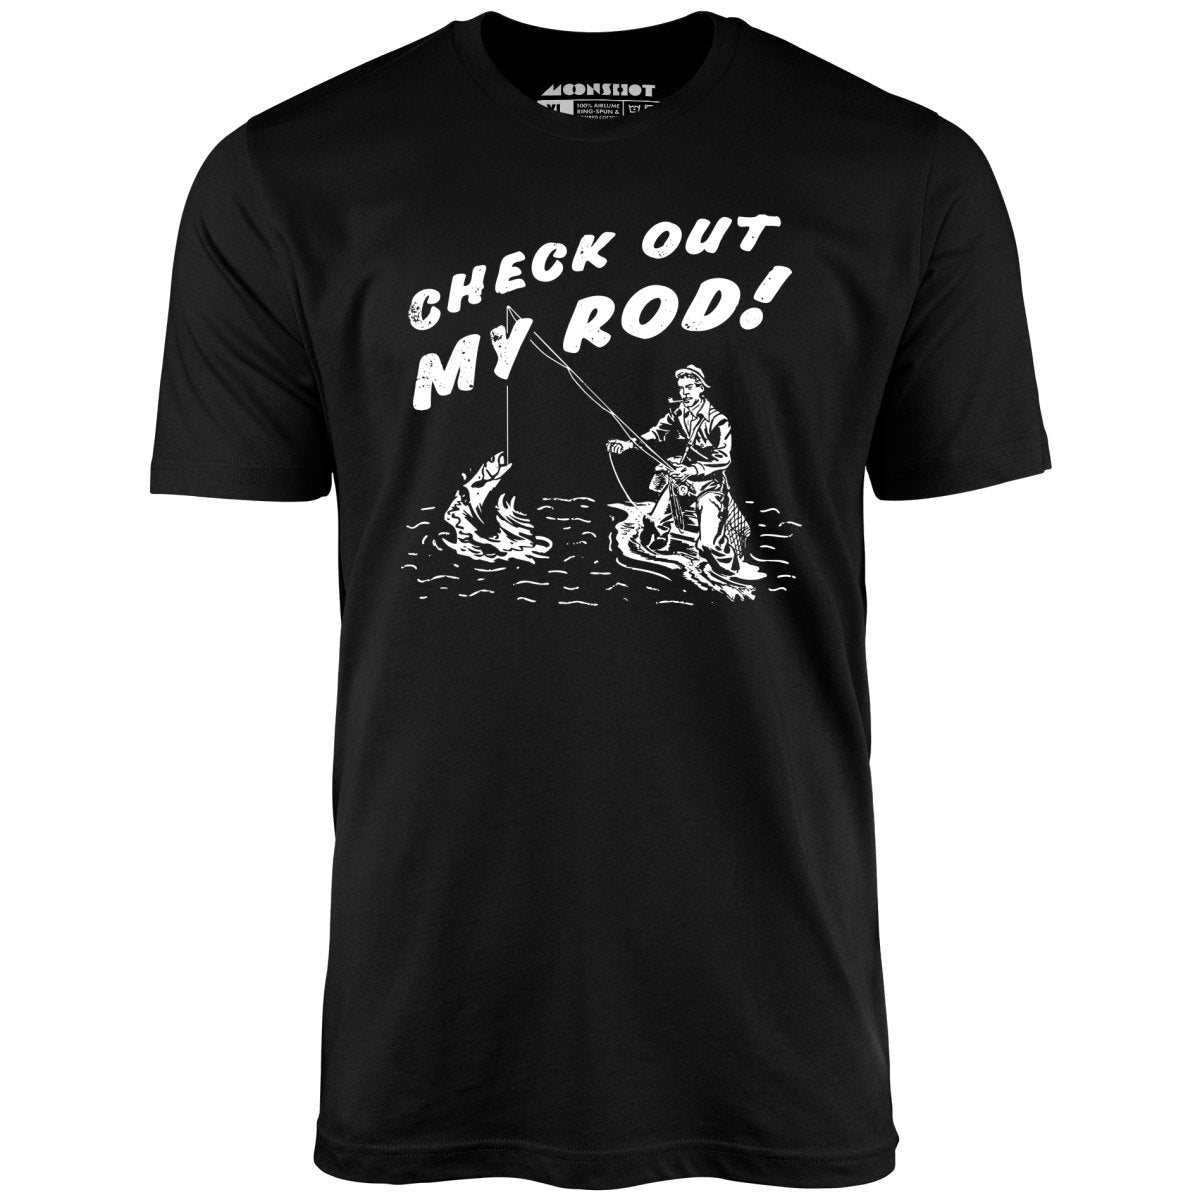 Check Out My Rod - Unisex T-Shirt